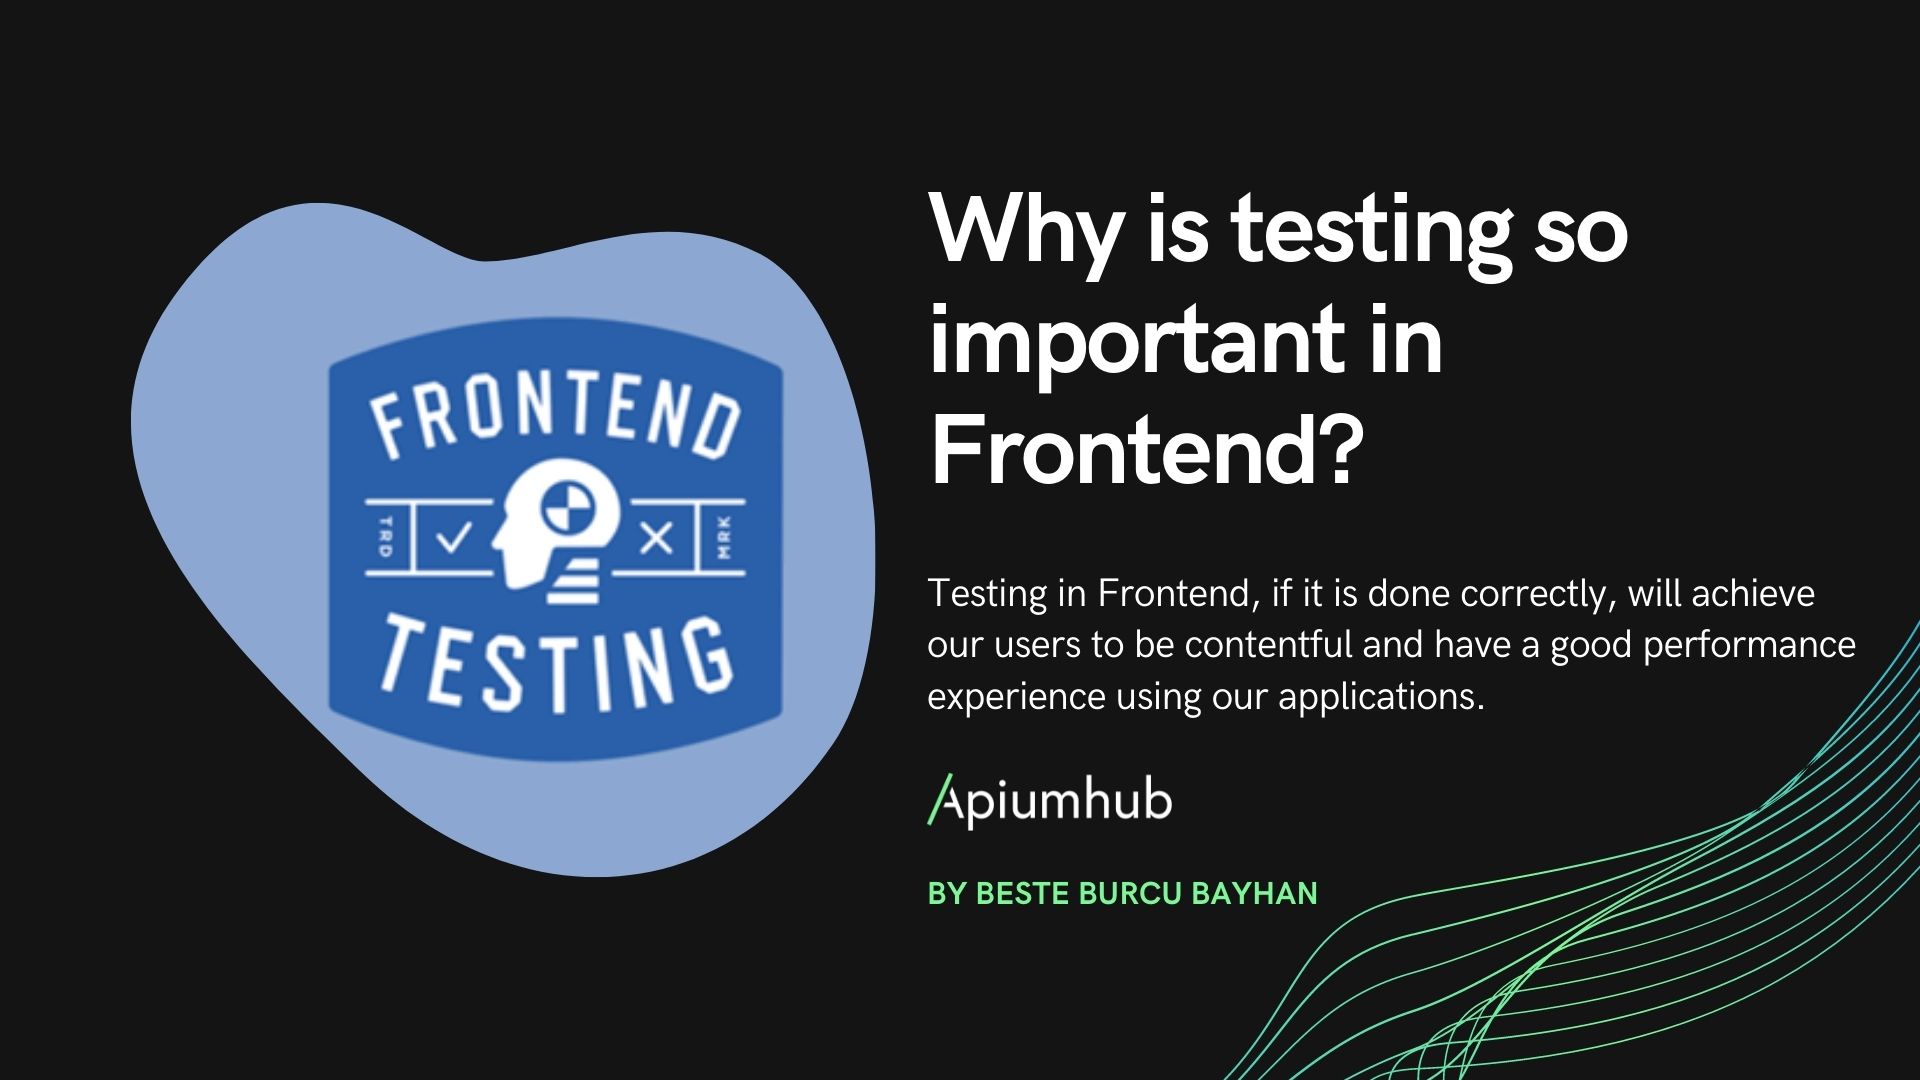 What is testing? Why is testing so important in Frontend?